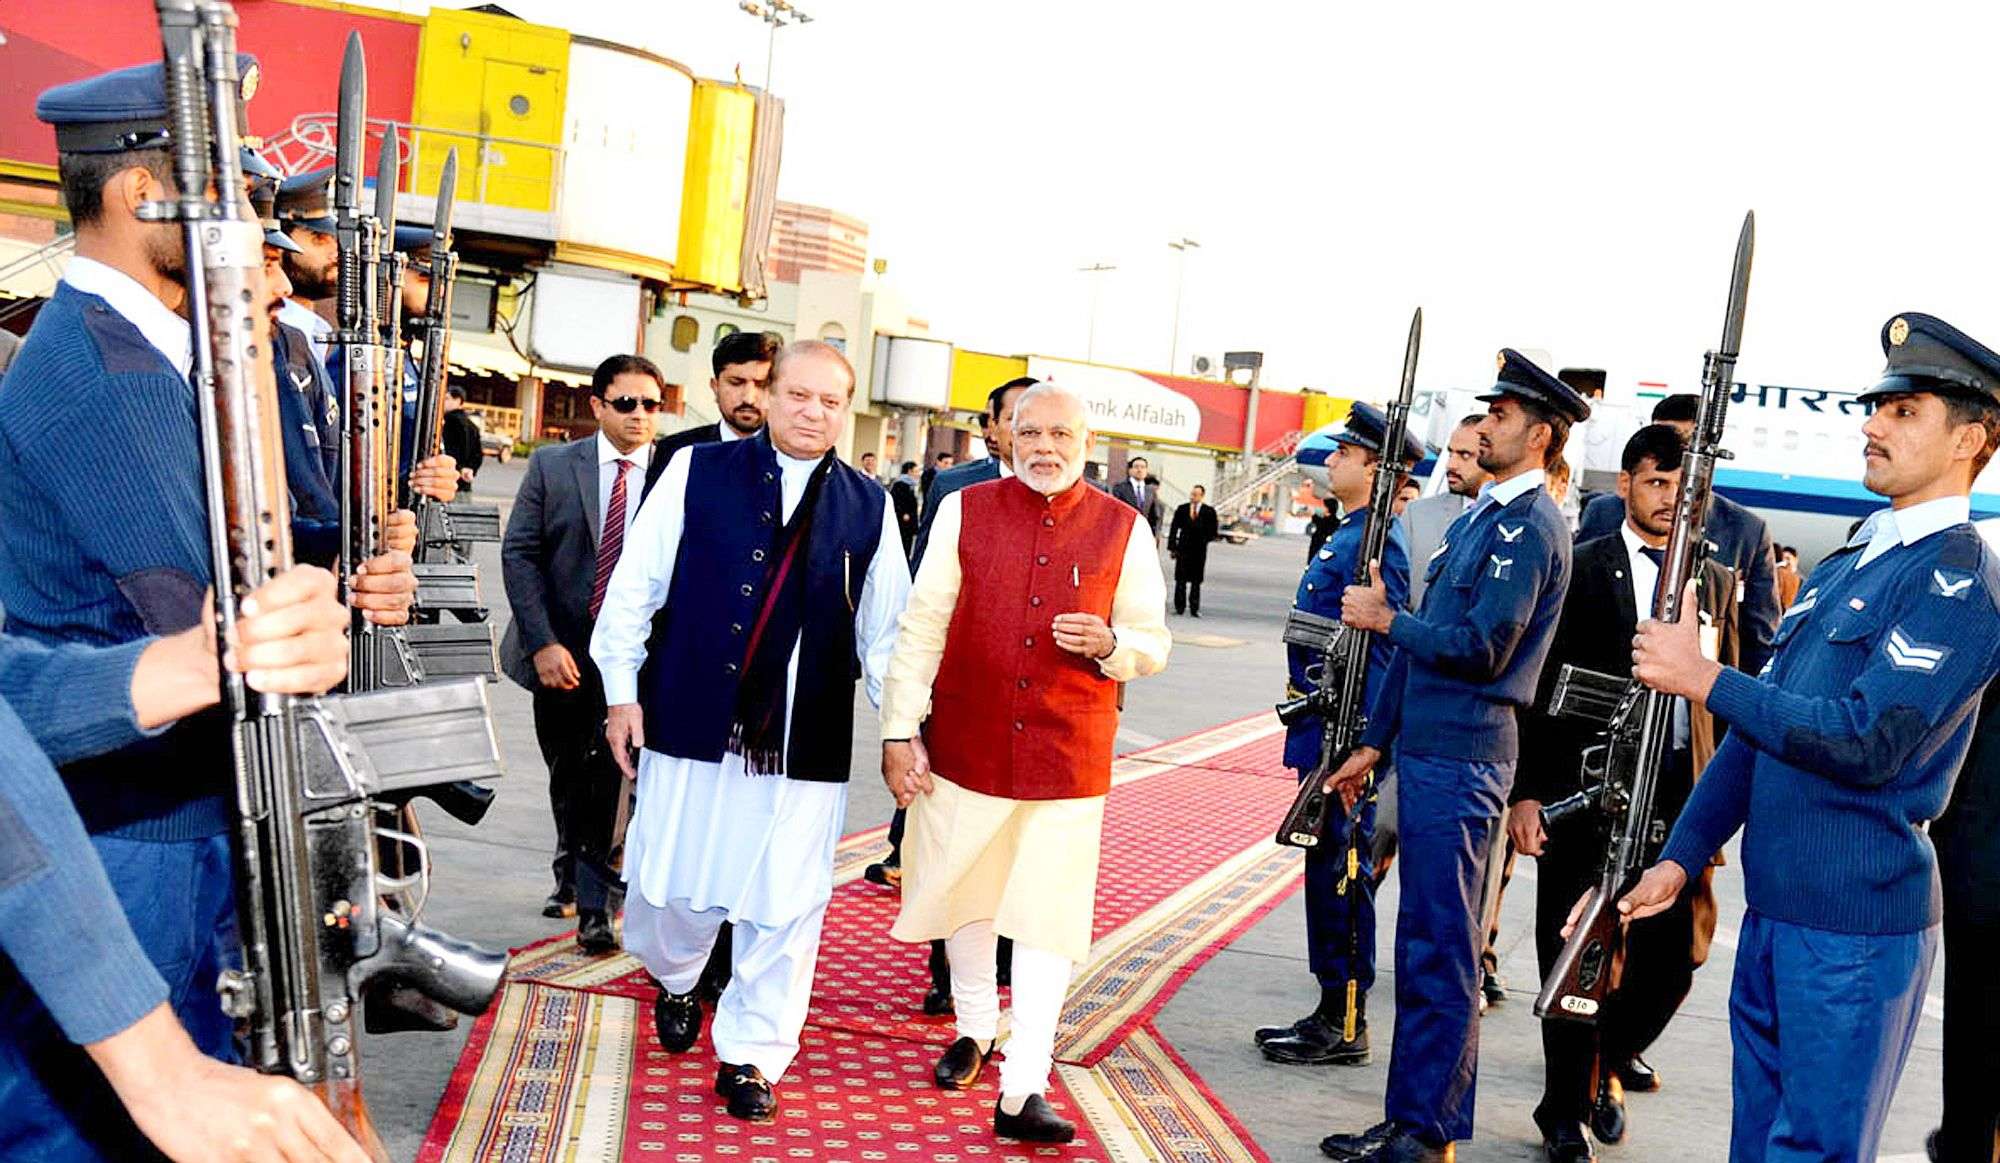 In this photo released by Press Information Department, India's Prime Minister Narendra Modi, right, reviews guard of honor with his Pakistani counterpart Nawaz Sharif in Lahore, Pakistan, Friday, Dec. 25, 2015. Modi arrived in Pakistan on Friday, his first visit as prime minister to this Islamic nation that has been India's long-standing archrival in the region. (AP Photo/Press Information Department)